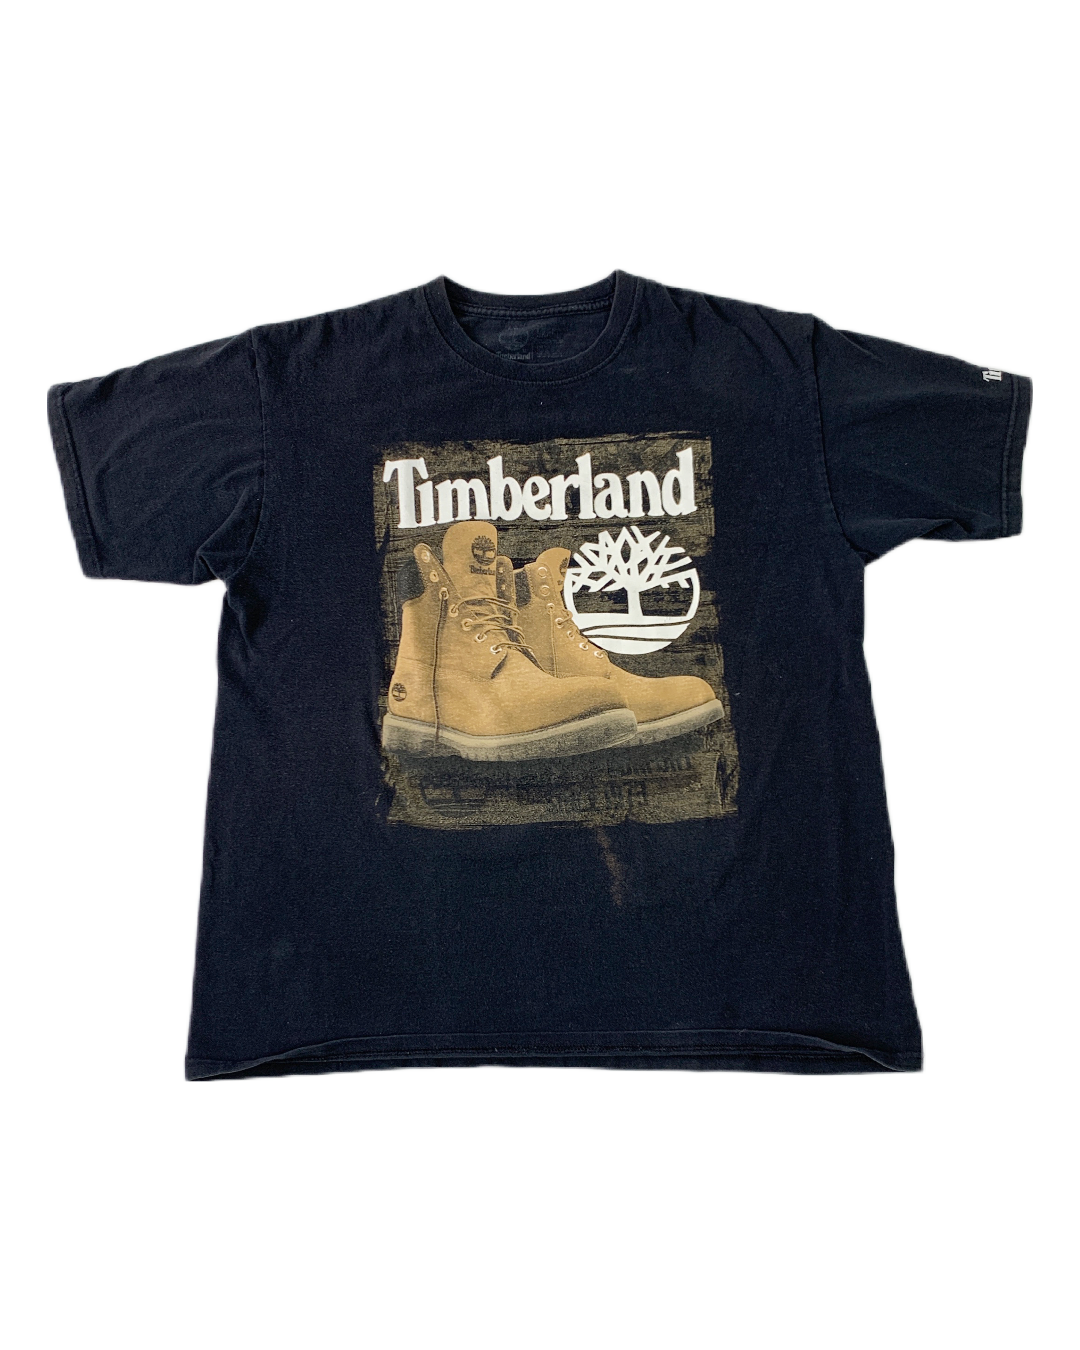 Timberland Y2K Boot Vintage T-Shirt - L